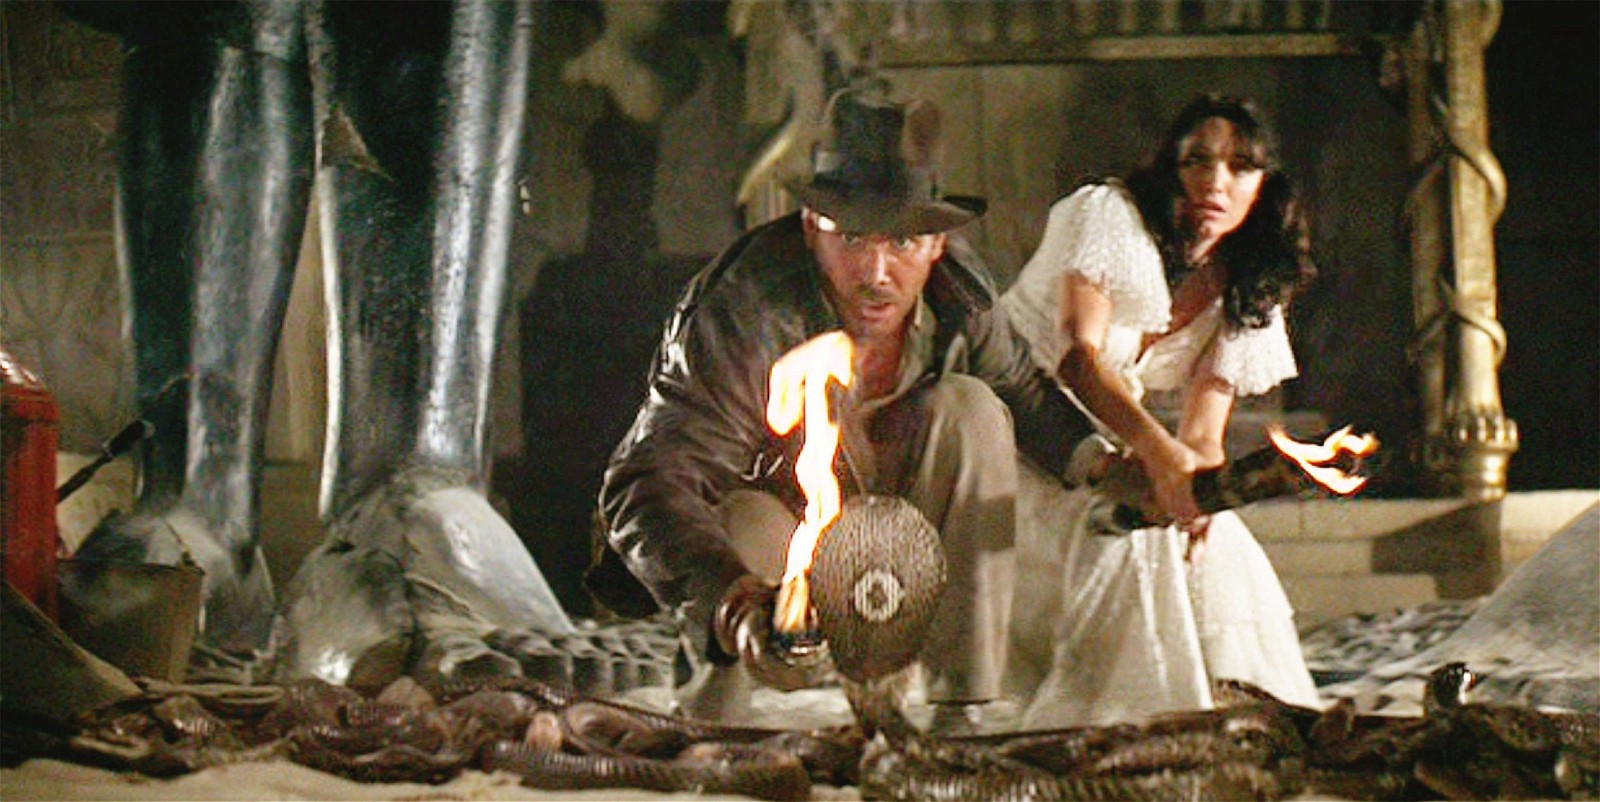 The snake infested chamber scene from Indiana Jones and the Raiders of the Lost Ark featuring 9,000 snakes